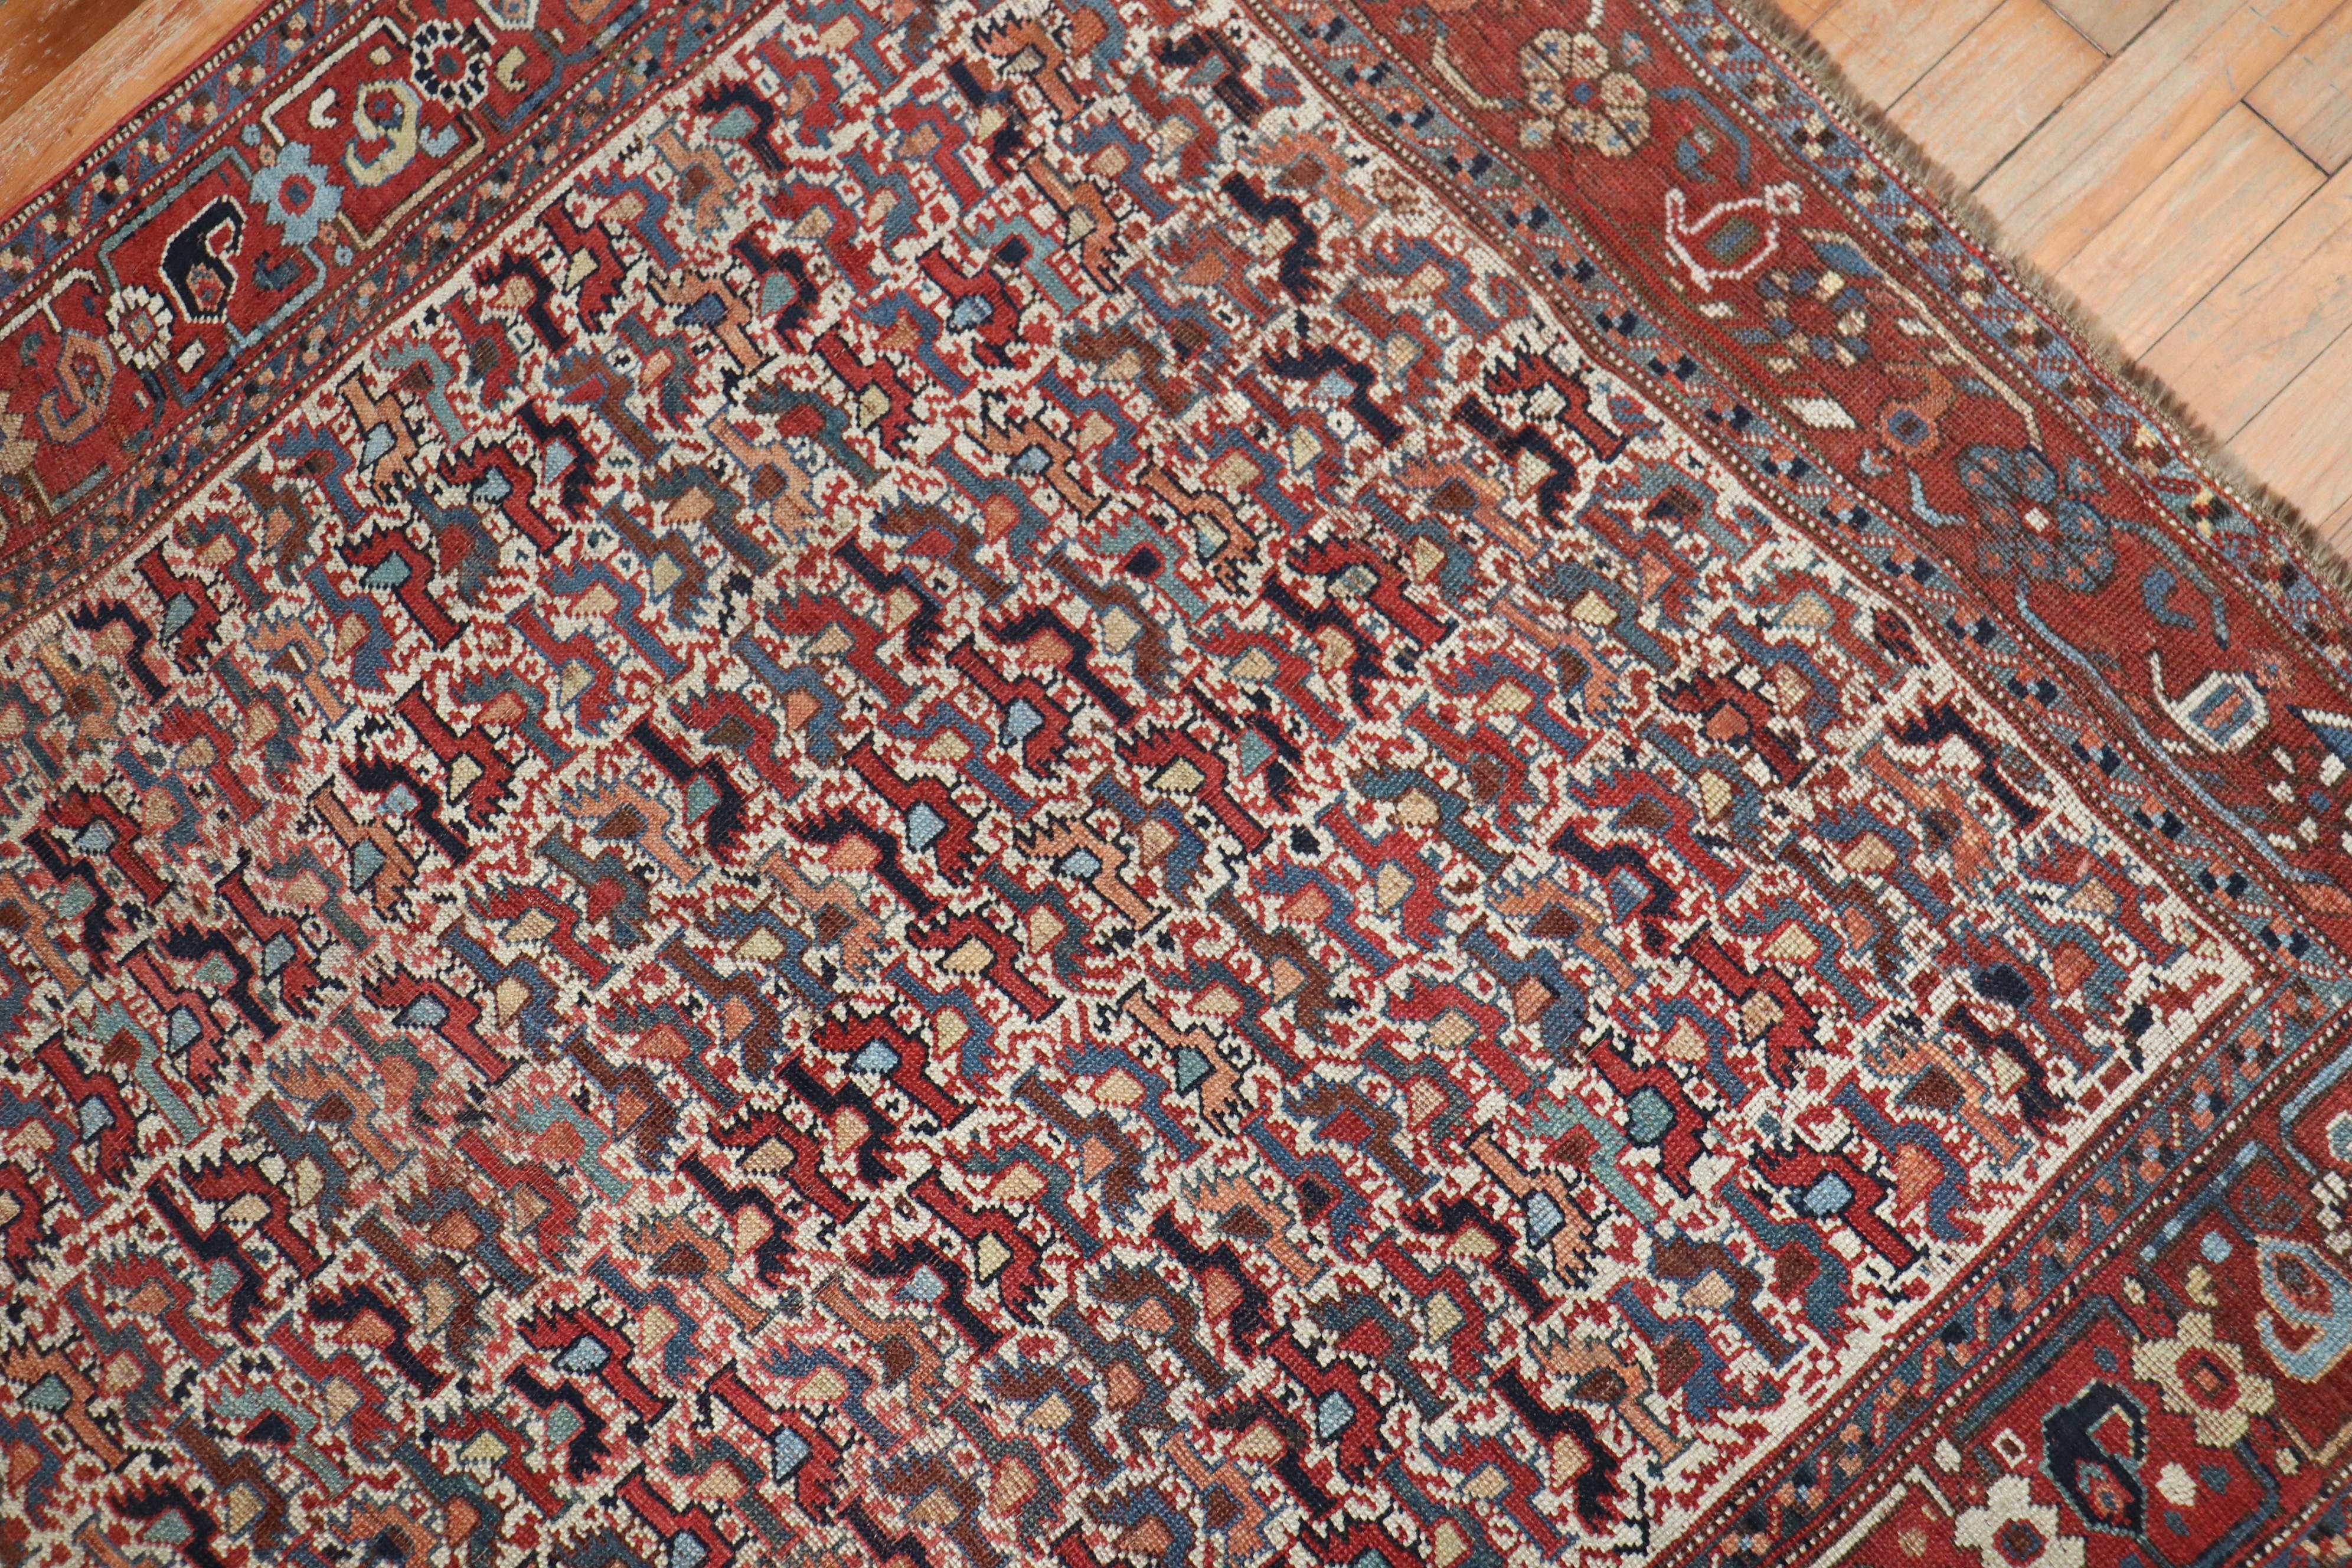 Wool Tribal Chicken Motif Rustic Persian Afshar Accent Rug, Early 20th Century For Sale